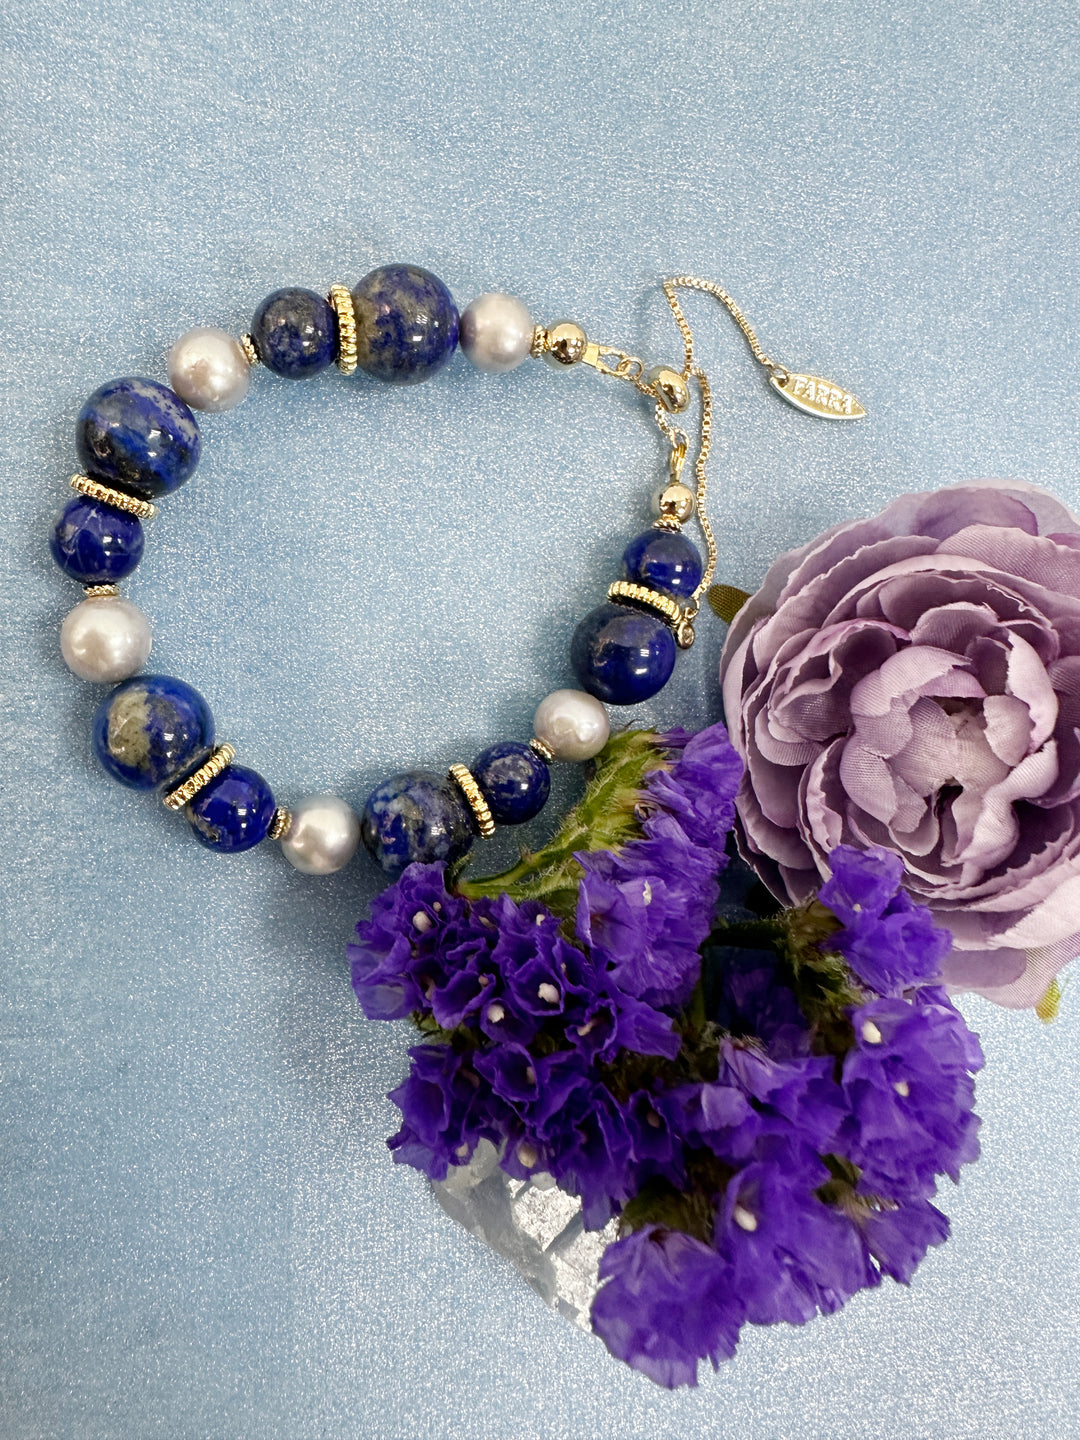 Nugget Blue Lapis with Gray Freshwater Pearls Adjustable Bracelet LB011